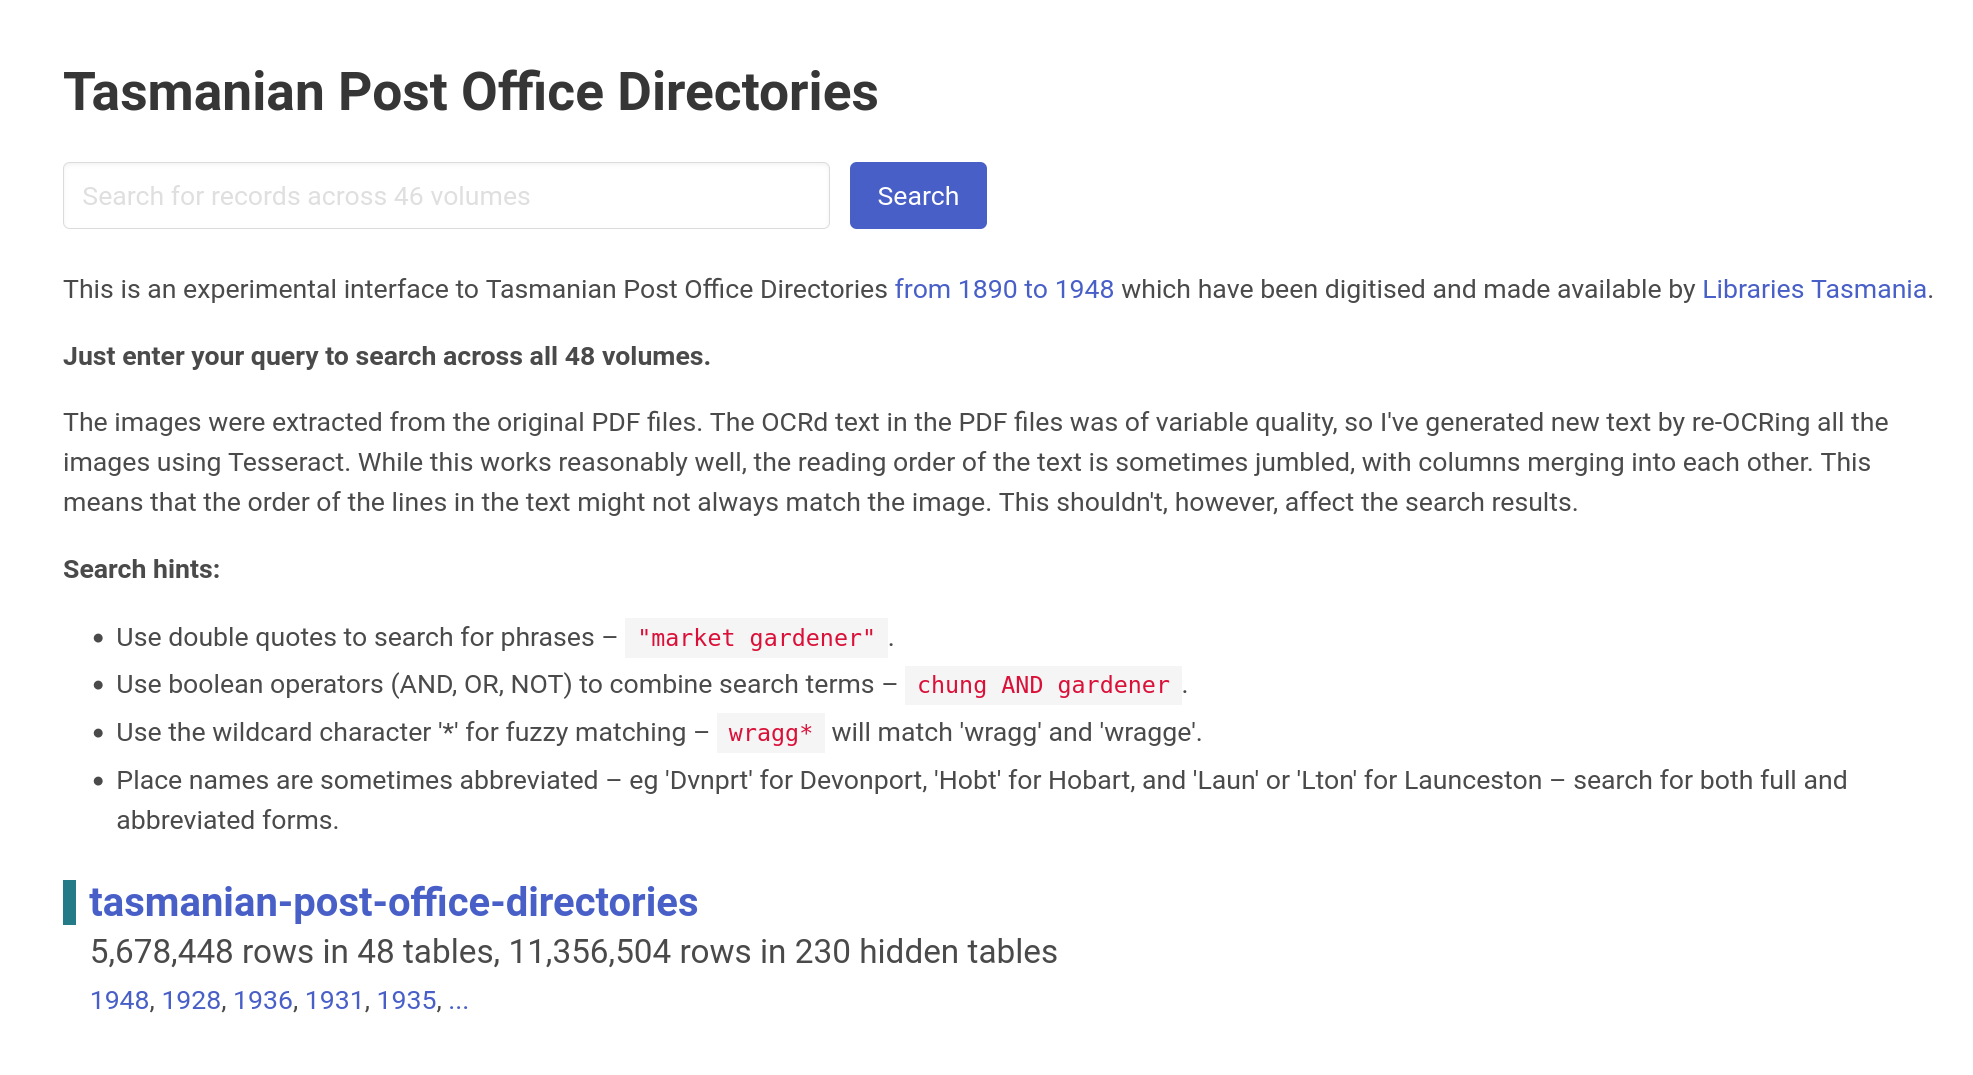 Screenshot of the Tasmanian Post Office Directories Search Interface